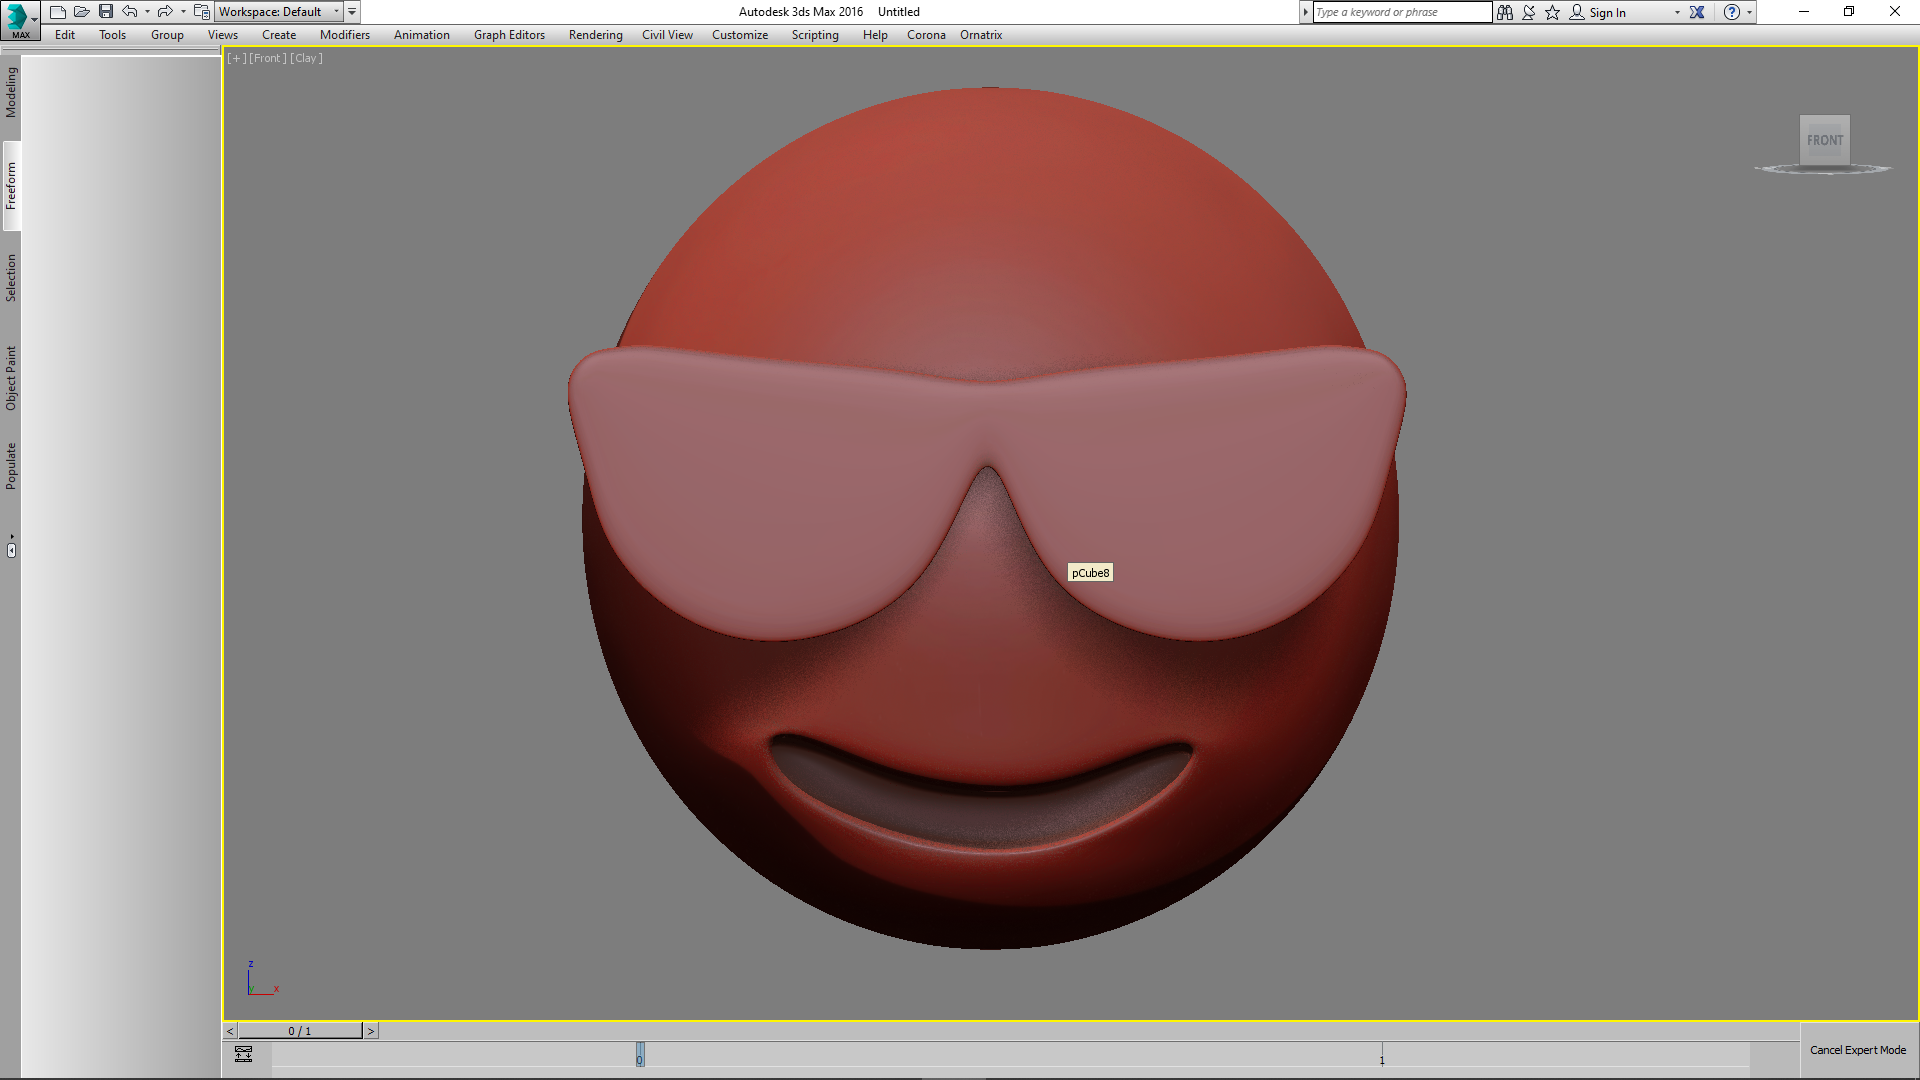 Emoji smiling face with sunglasses 3D model